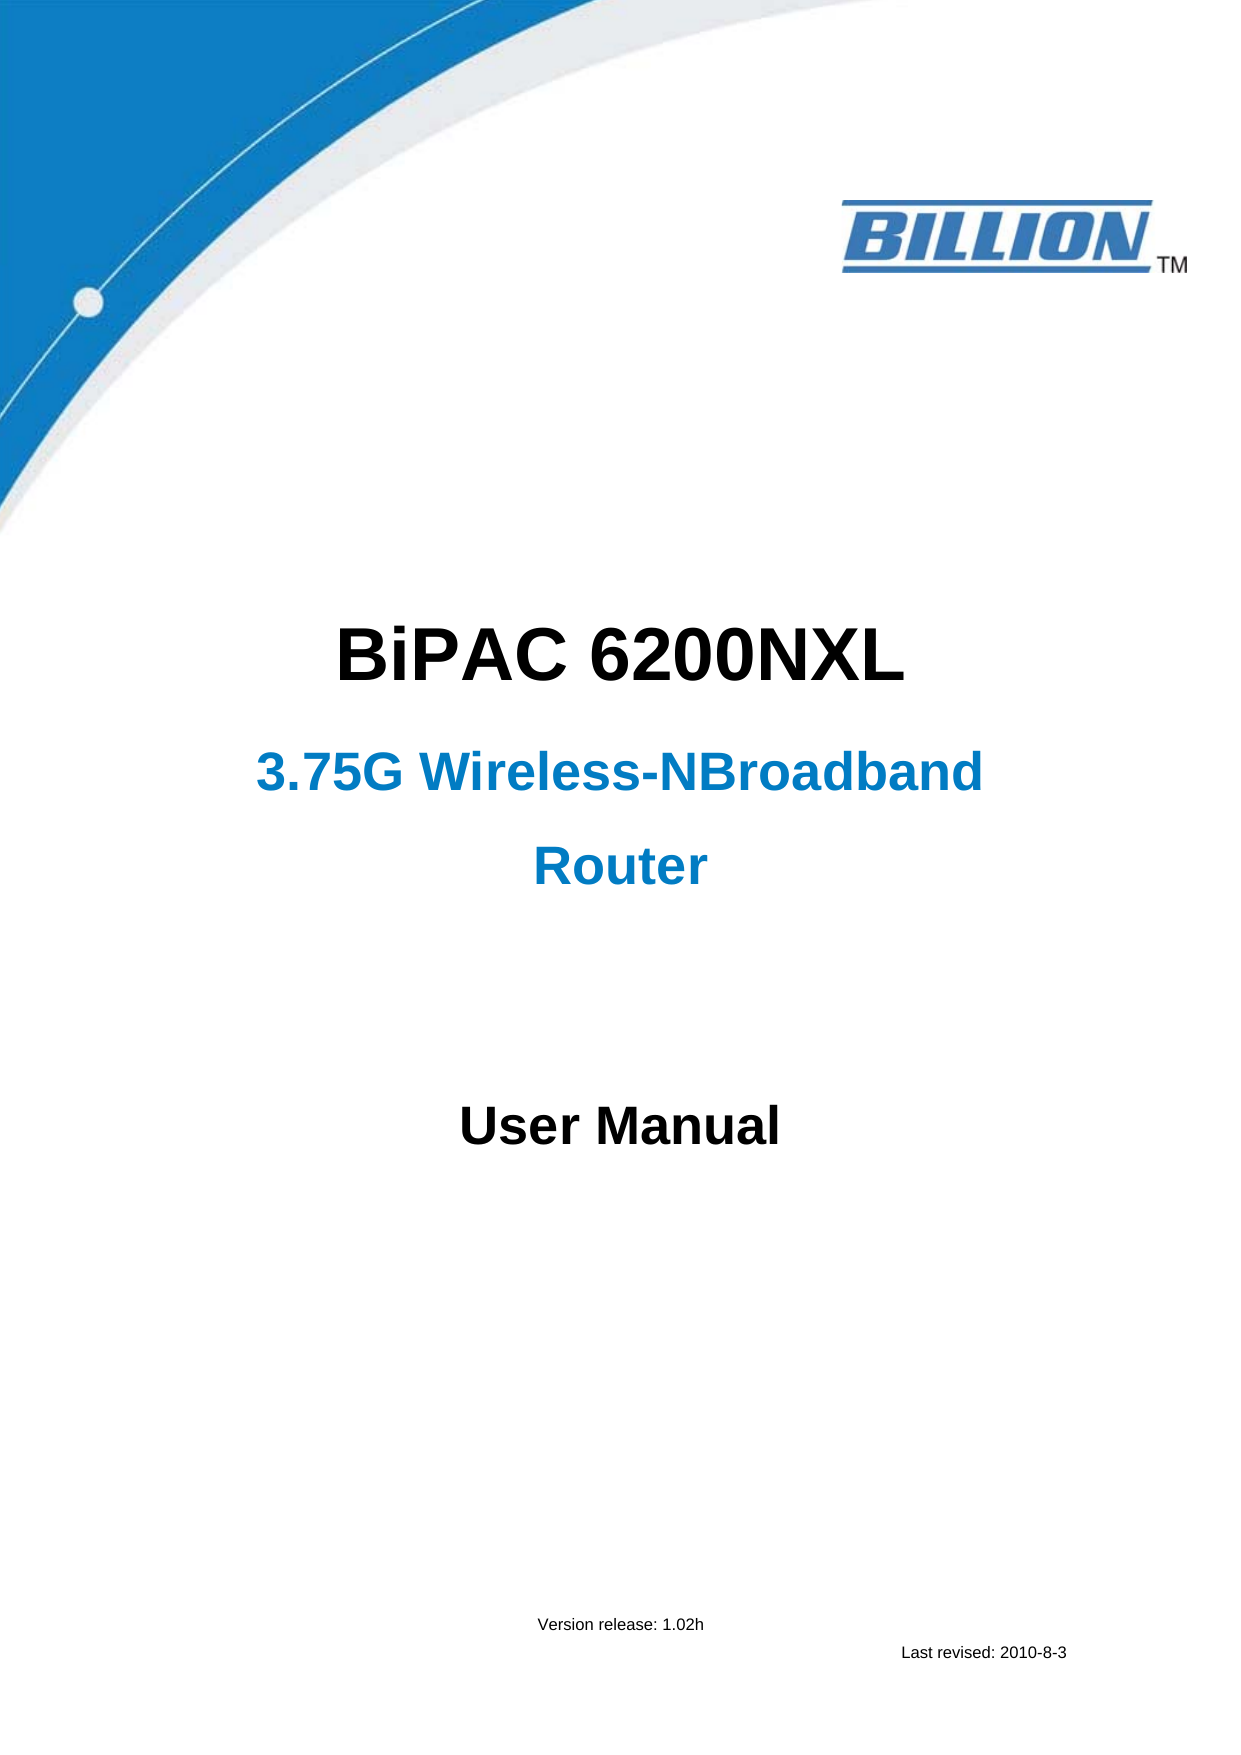                      BiPAC 6200NXL 3.75G Wireless-NBroadband Router         User Manual        Version release: 1.02h Last revised: 2010-8-3  